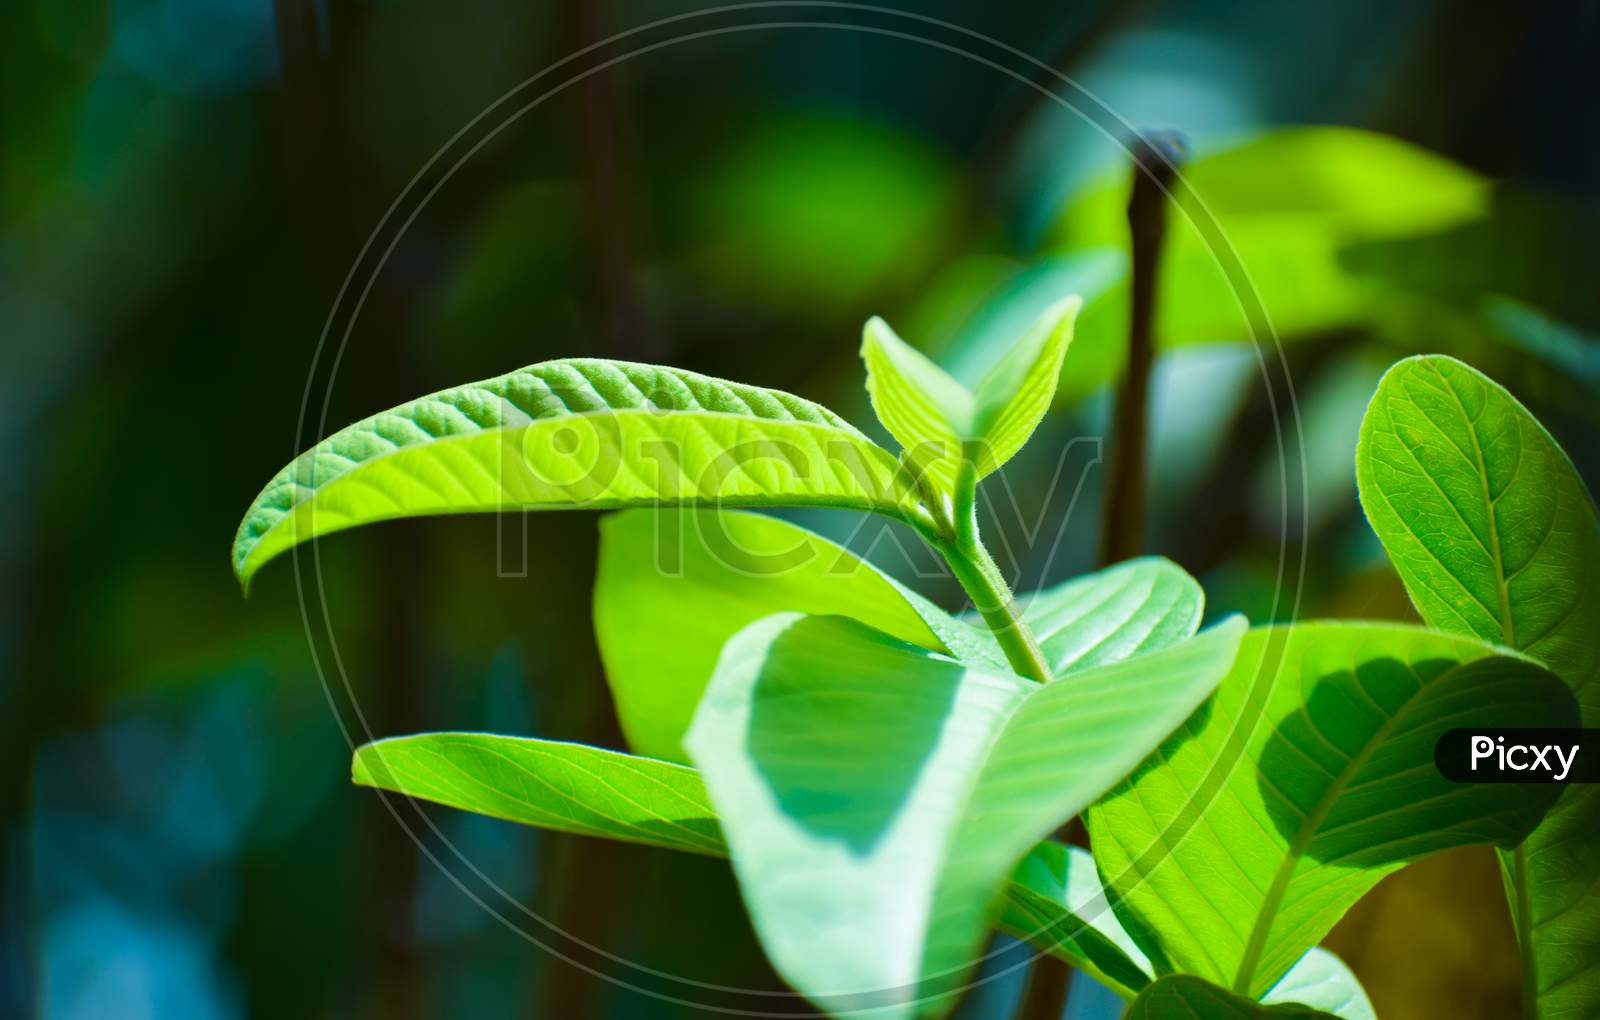 Green Leaf with green background